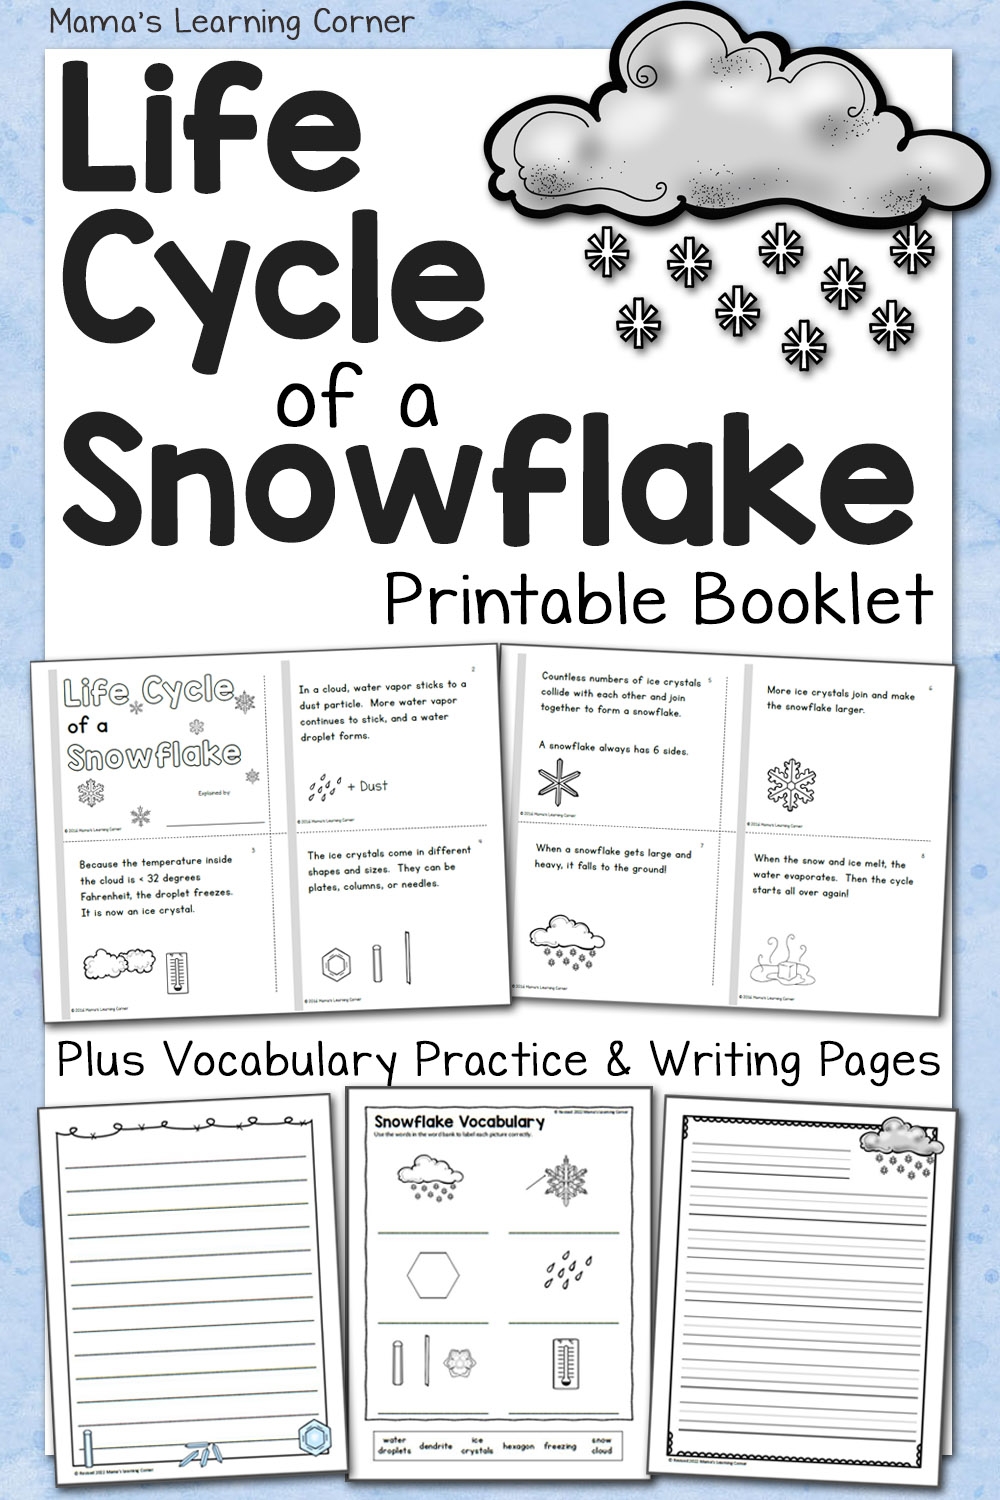 Life Cycle Of A Snowflake Booklet Mamas Learning Corner